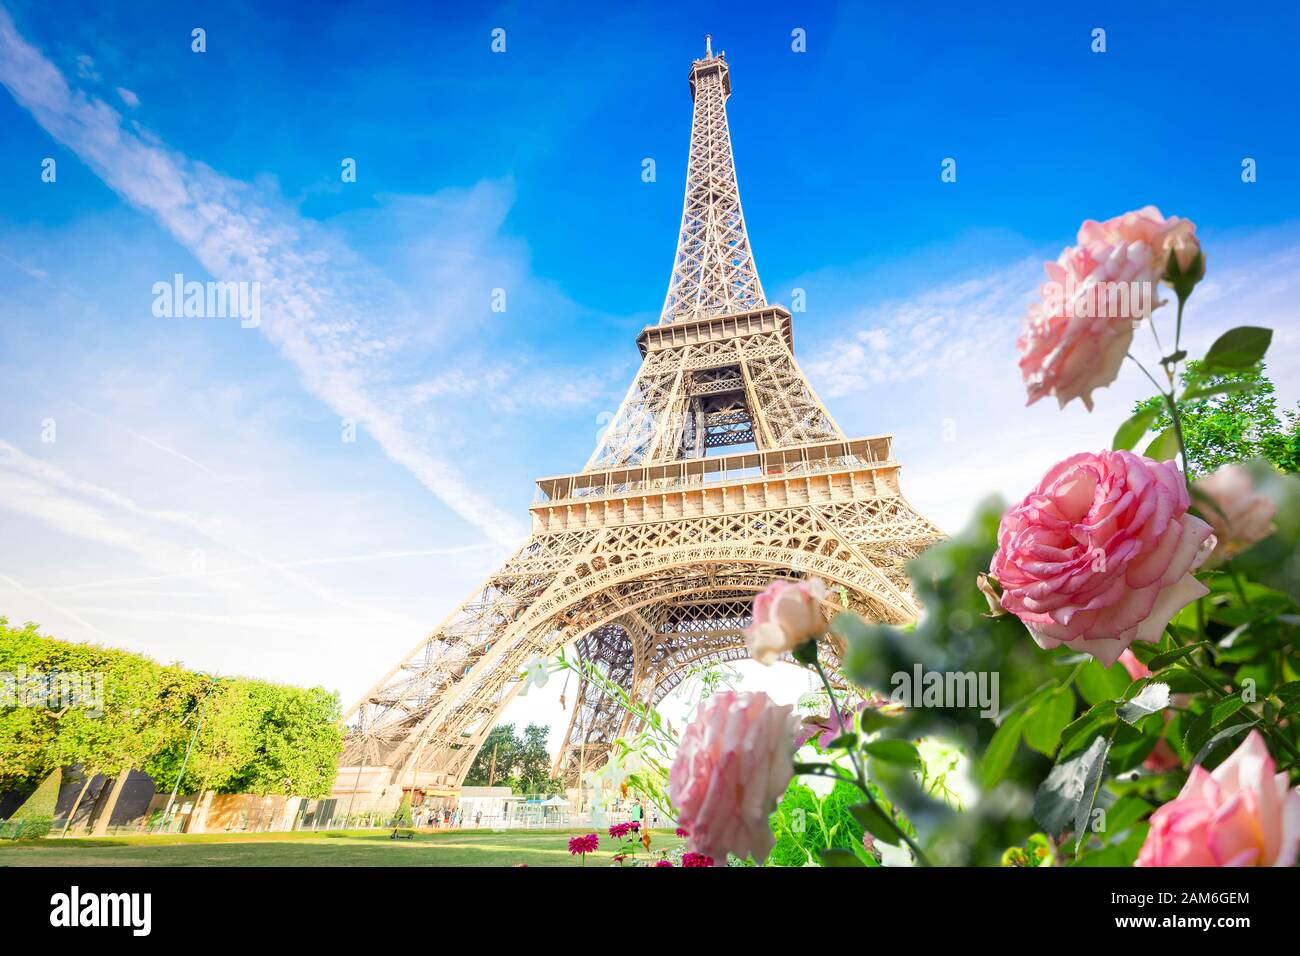 Paris Eiffel Tower with summer flowers in Paris, France. Eiffel Tower is one of the most iconic landmarks of Paris. Stock Photo